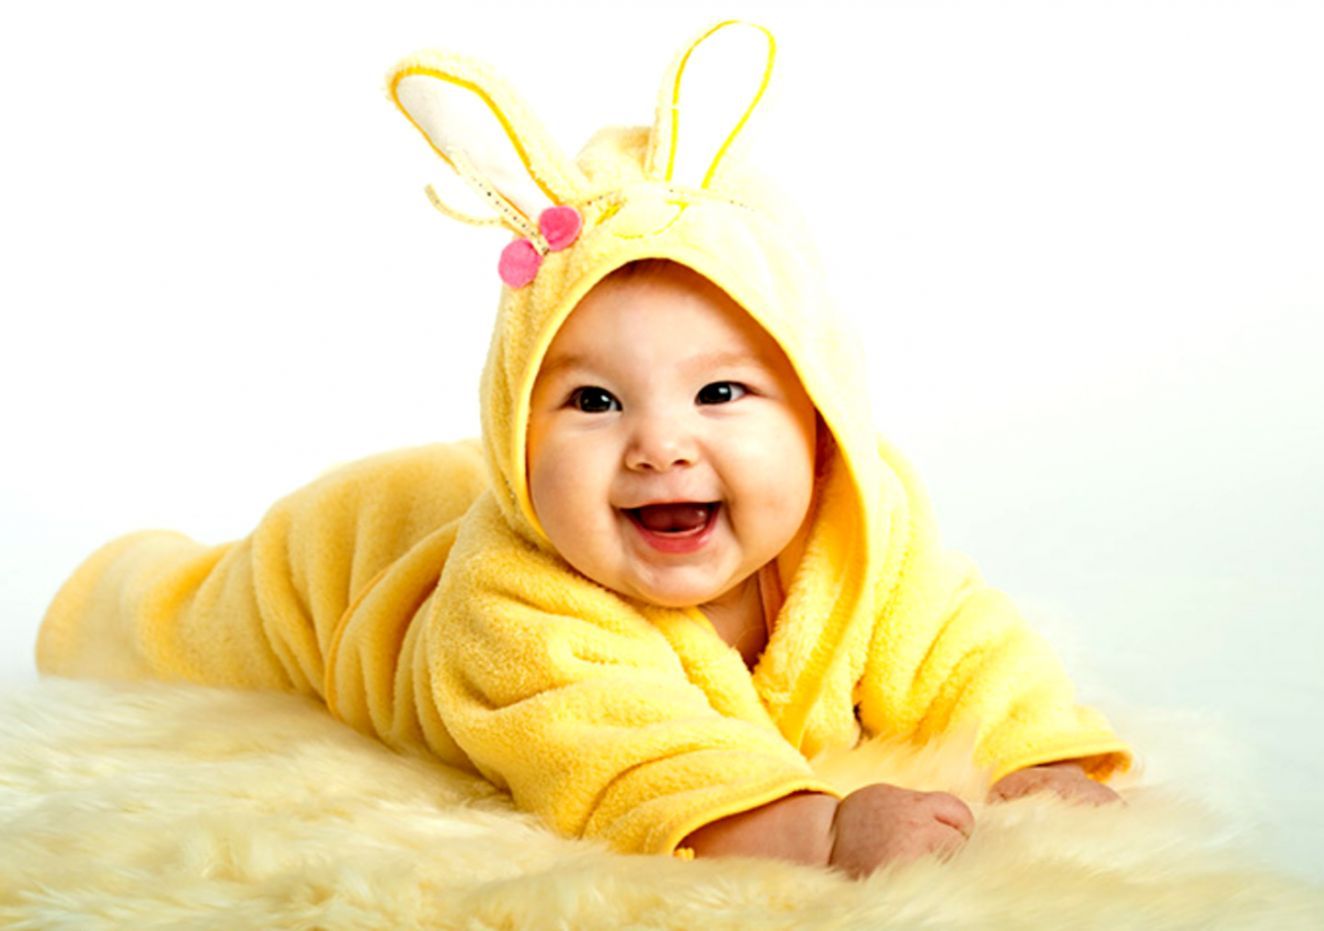 Cute Baby Smile Image